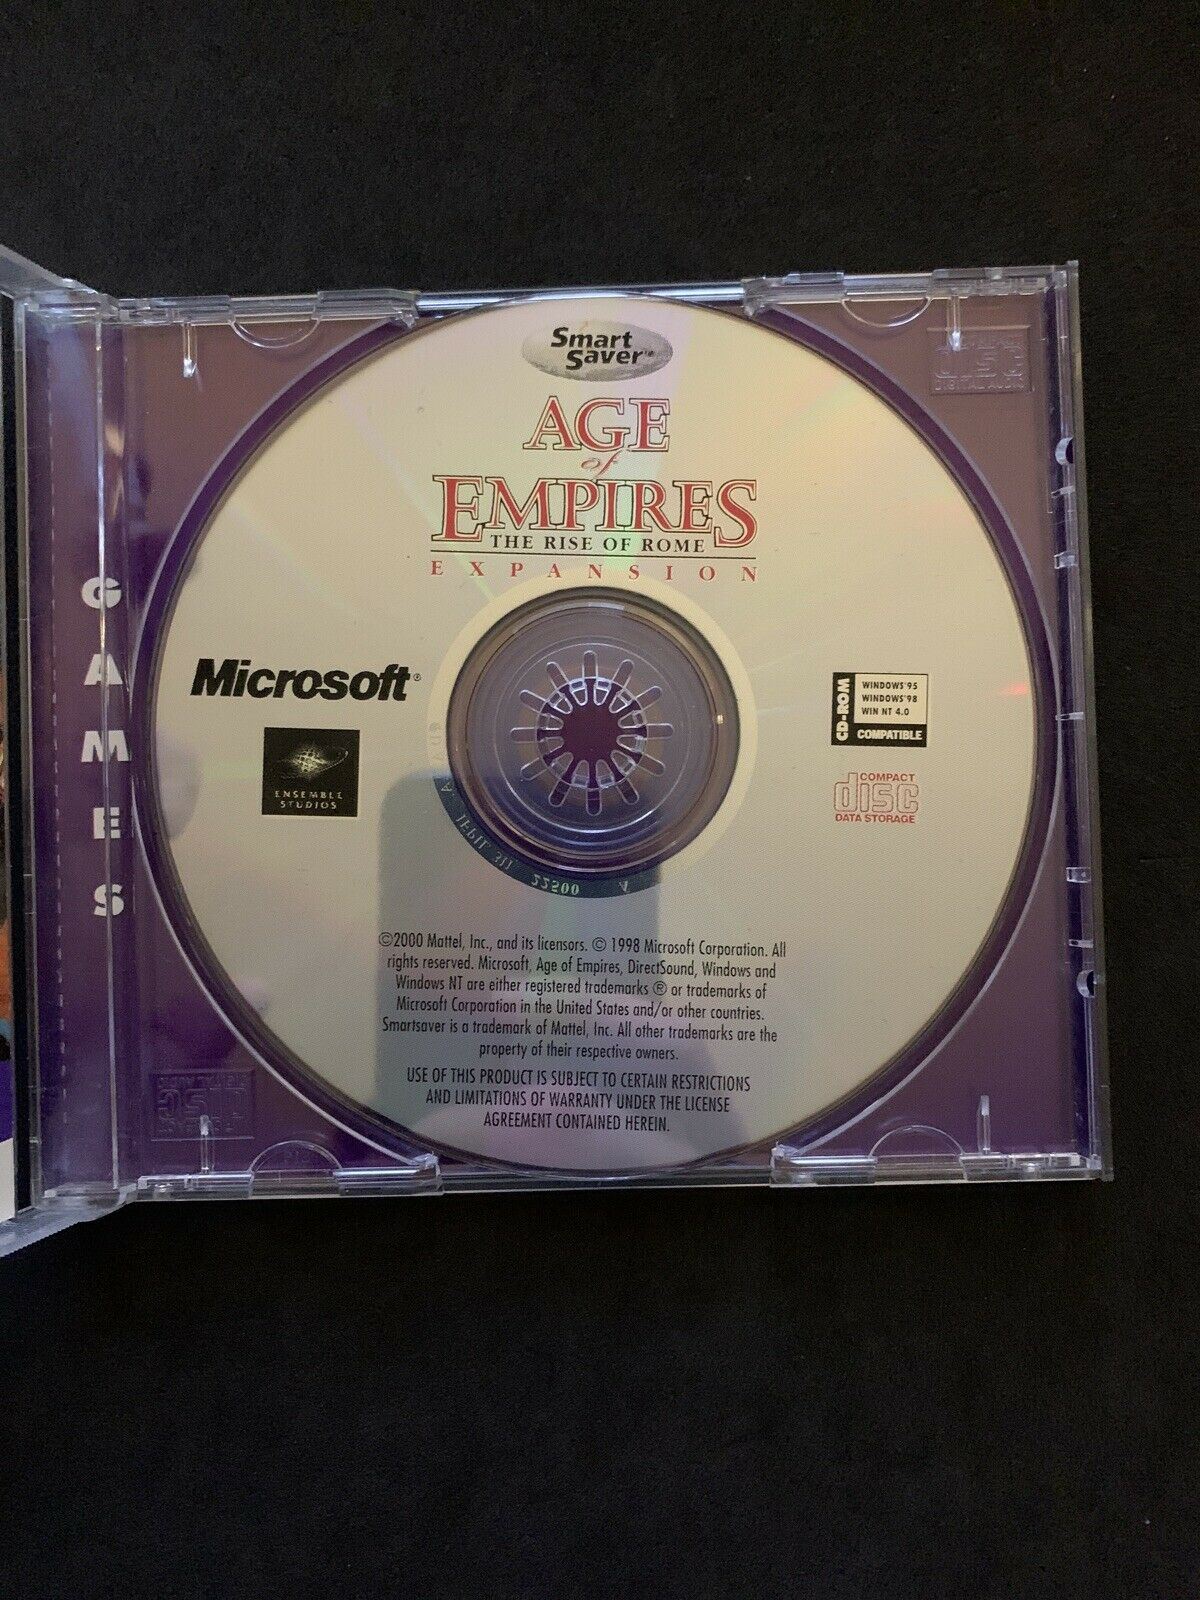 Age of Empires: The Rise of Rome Expansion for Windows 95/98/Windows NT 4.0